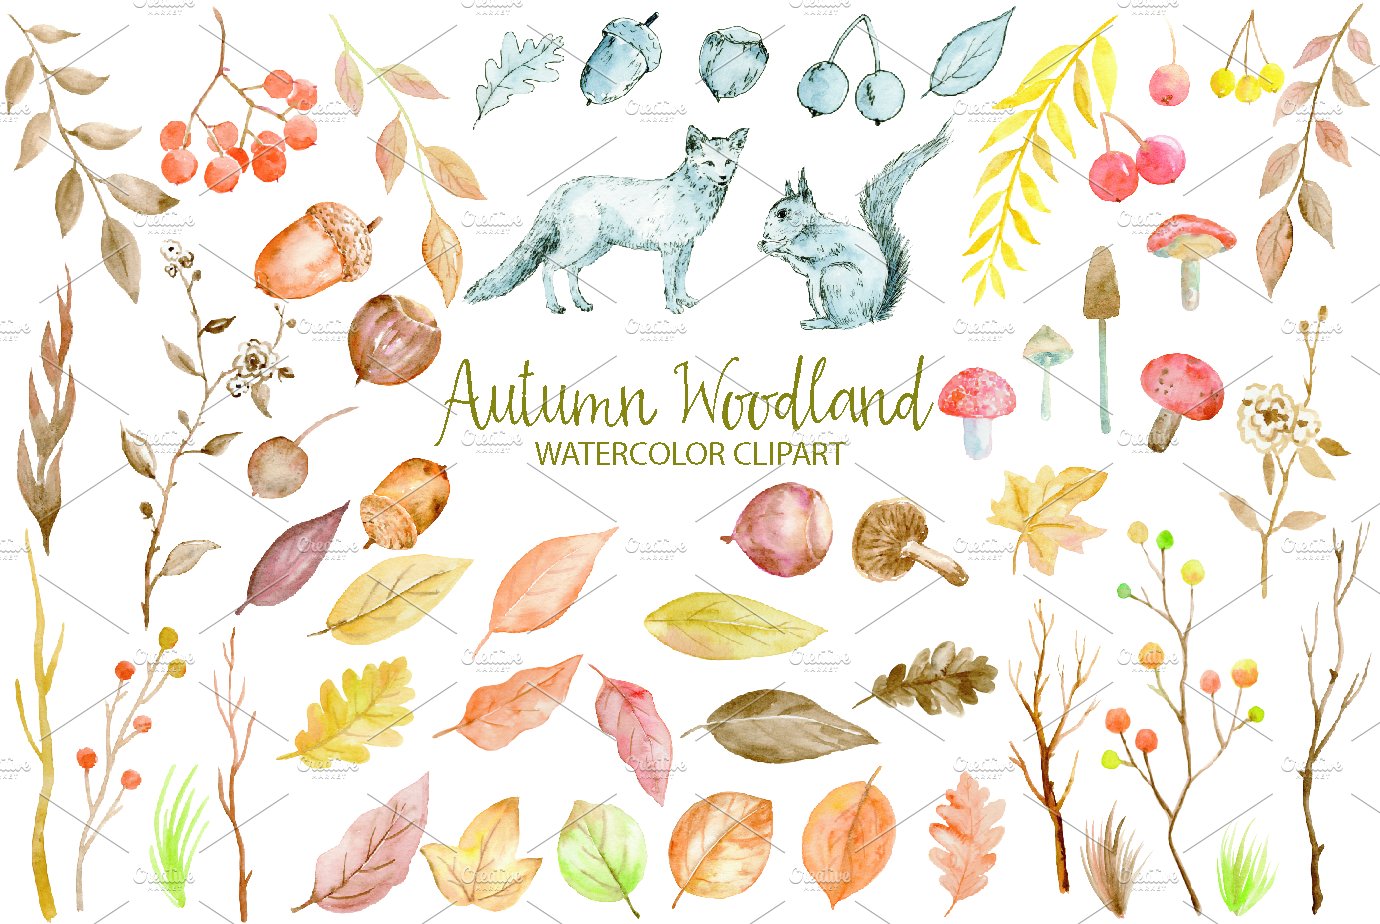 Watercolor Clipart Autumn Woodland preview image.